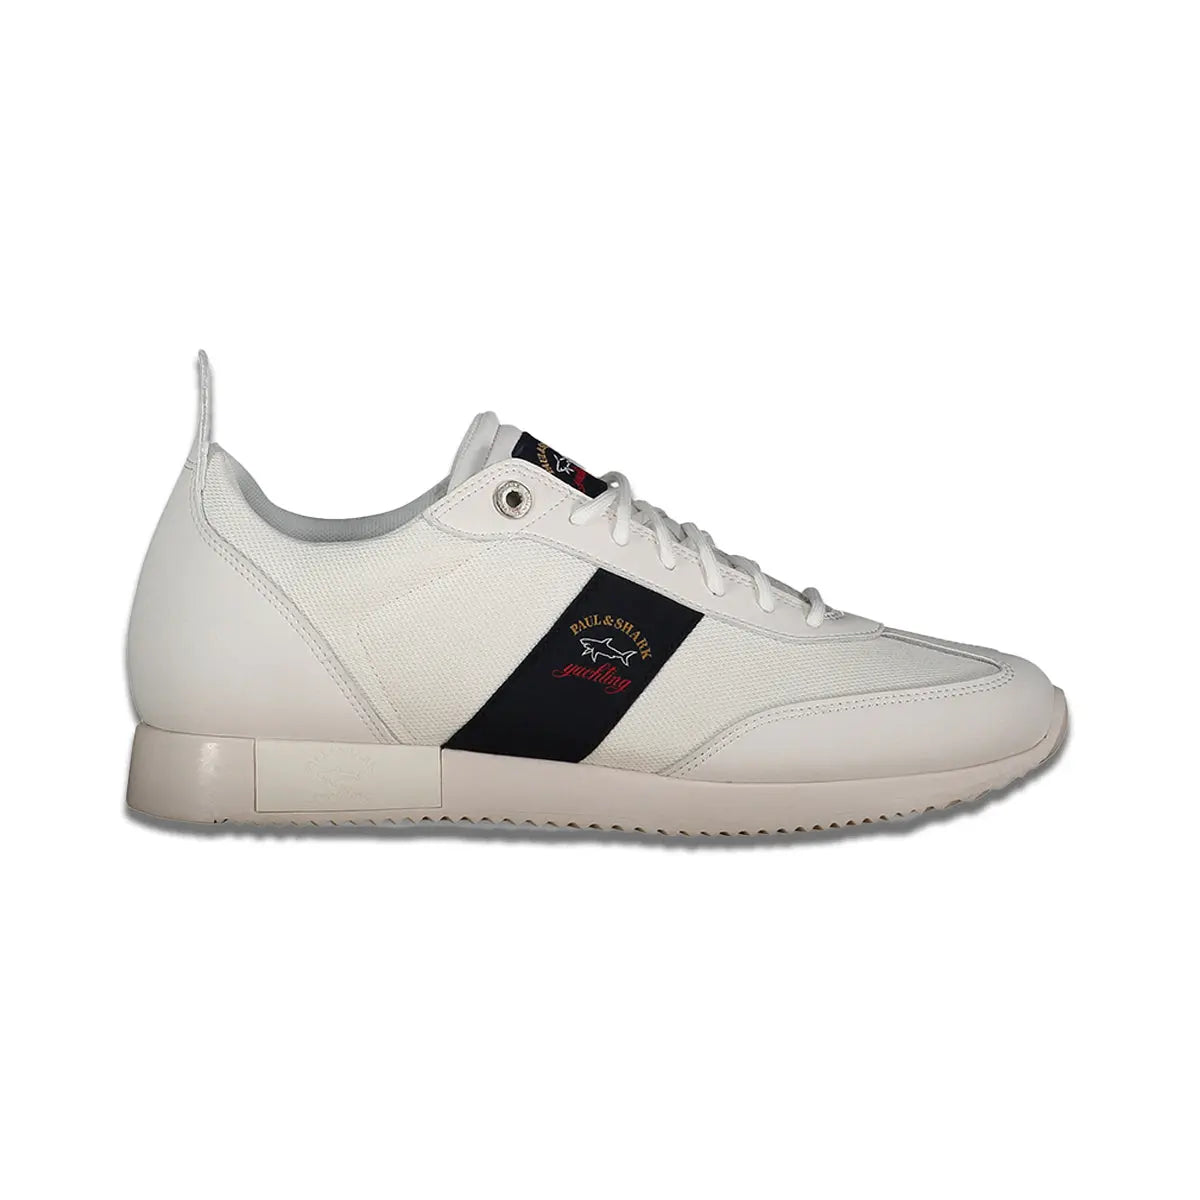 White Hybrid Leather & Tech-Fabric Sneakers  Paul & Shark   